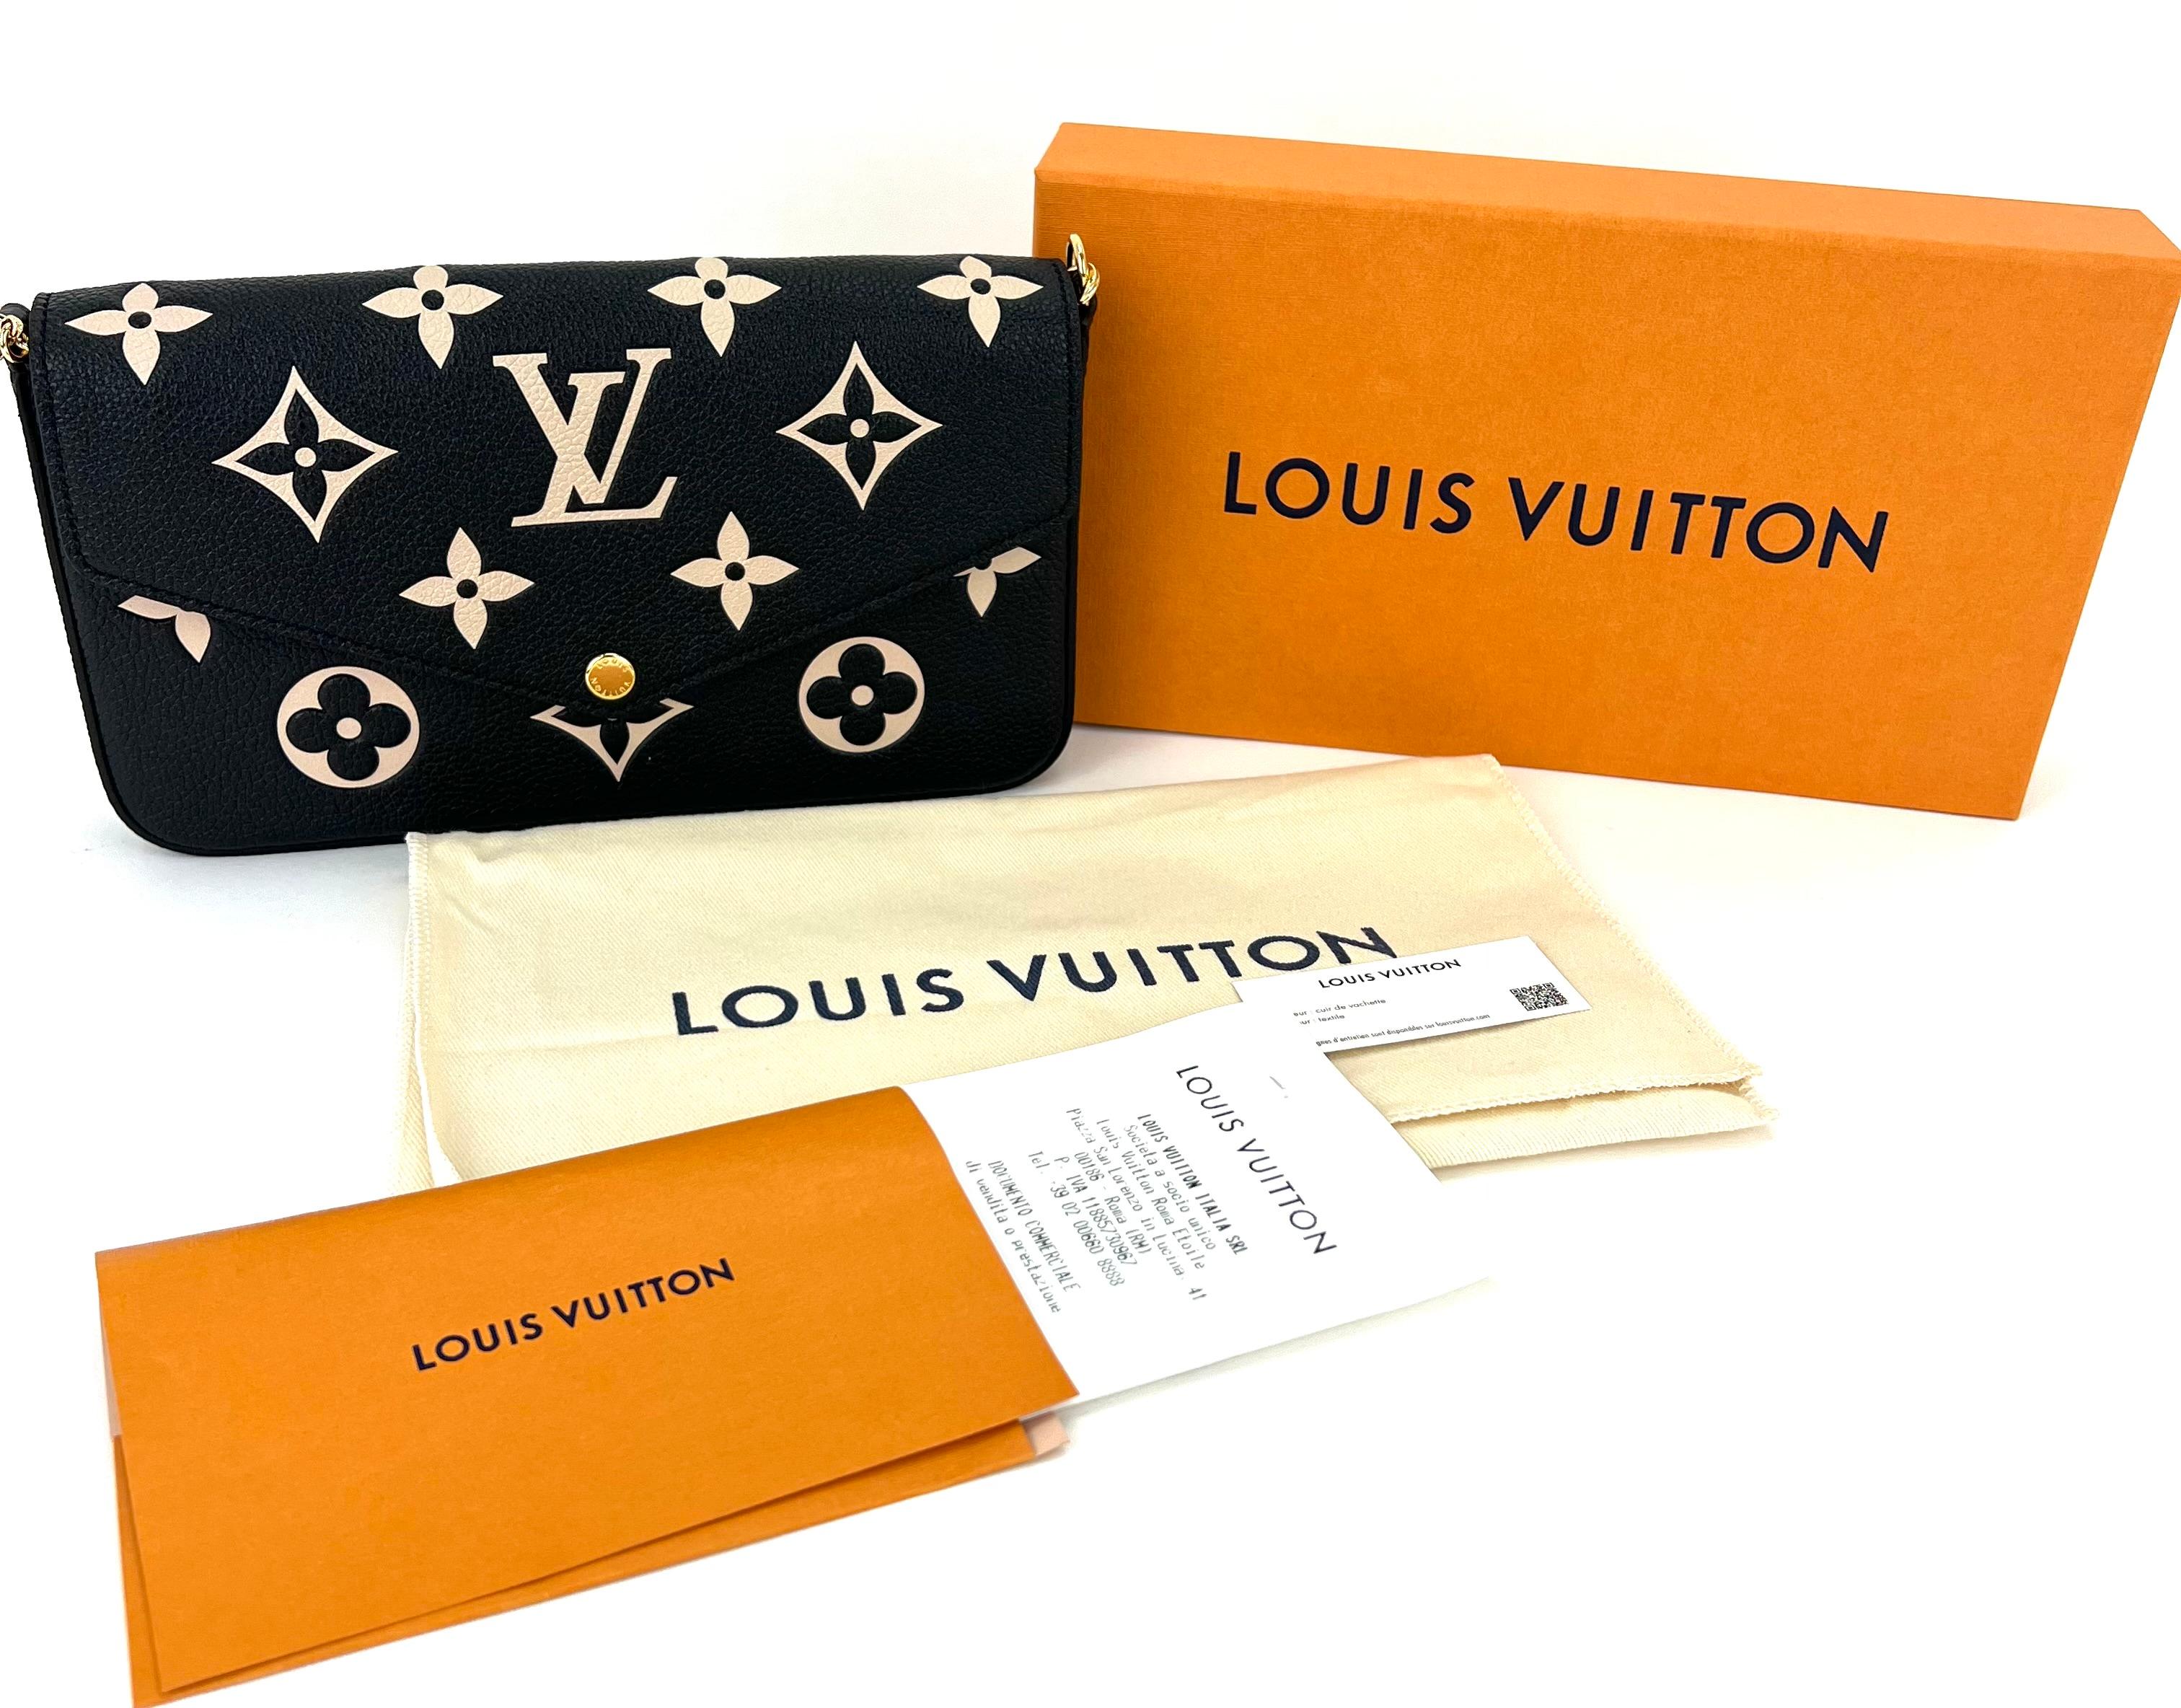 Louis Vuitton Felicie Pochette Giant
Monogram Black Beige Empreinte Leather 
NEW 100% AUTHENTIC
CONDITION: New
COLOR:  bicolor, black, beige
DATE CODE: As of 3/1/21 No date codes
NFC Tag Detected
MATERIAL: monogram Empreinte embossed
supple grained